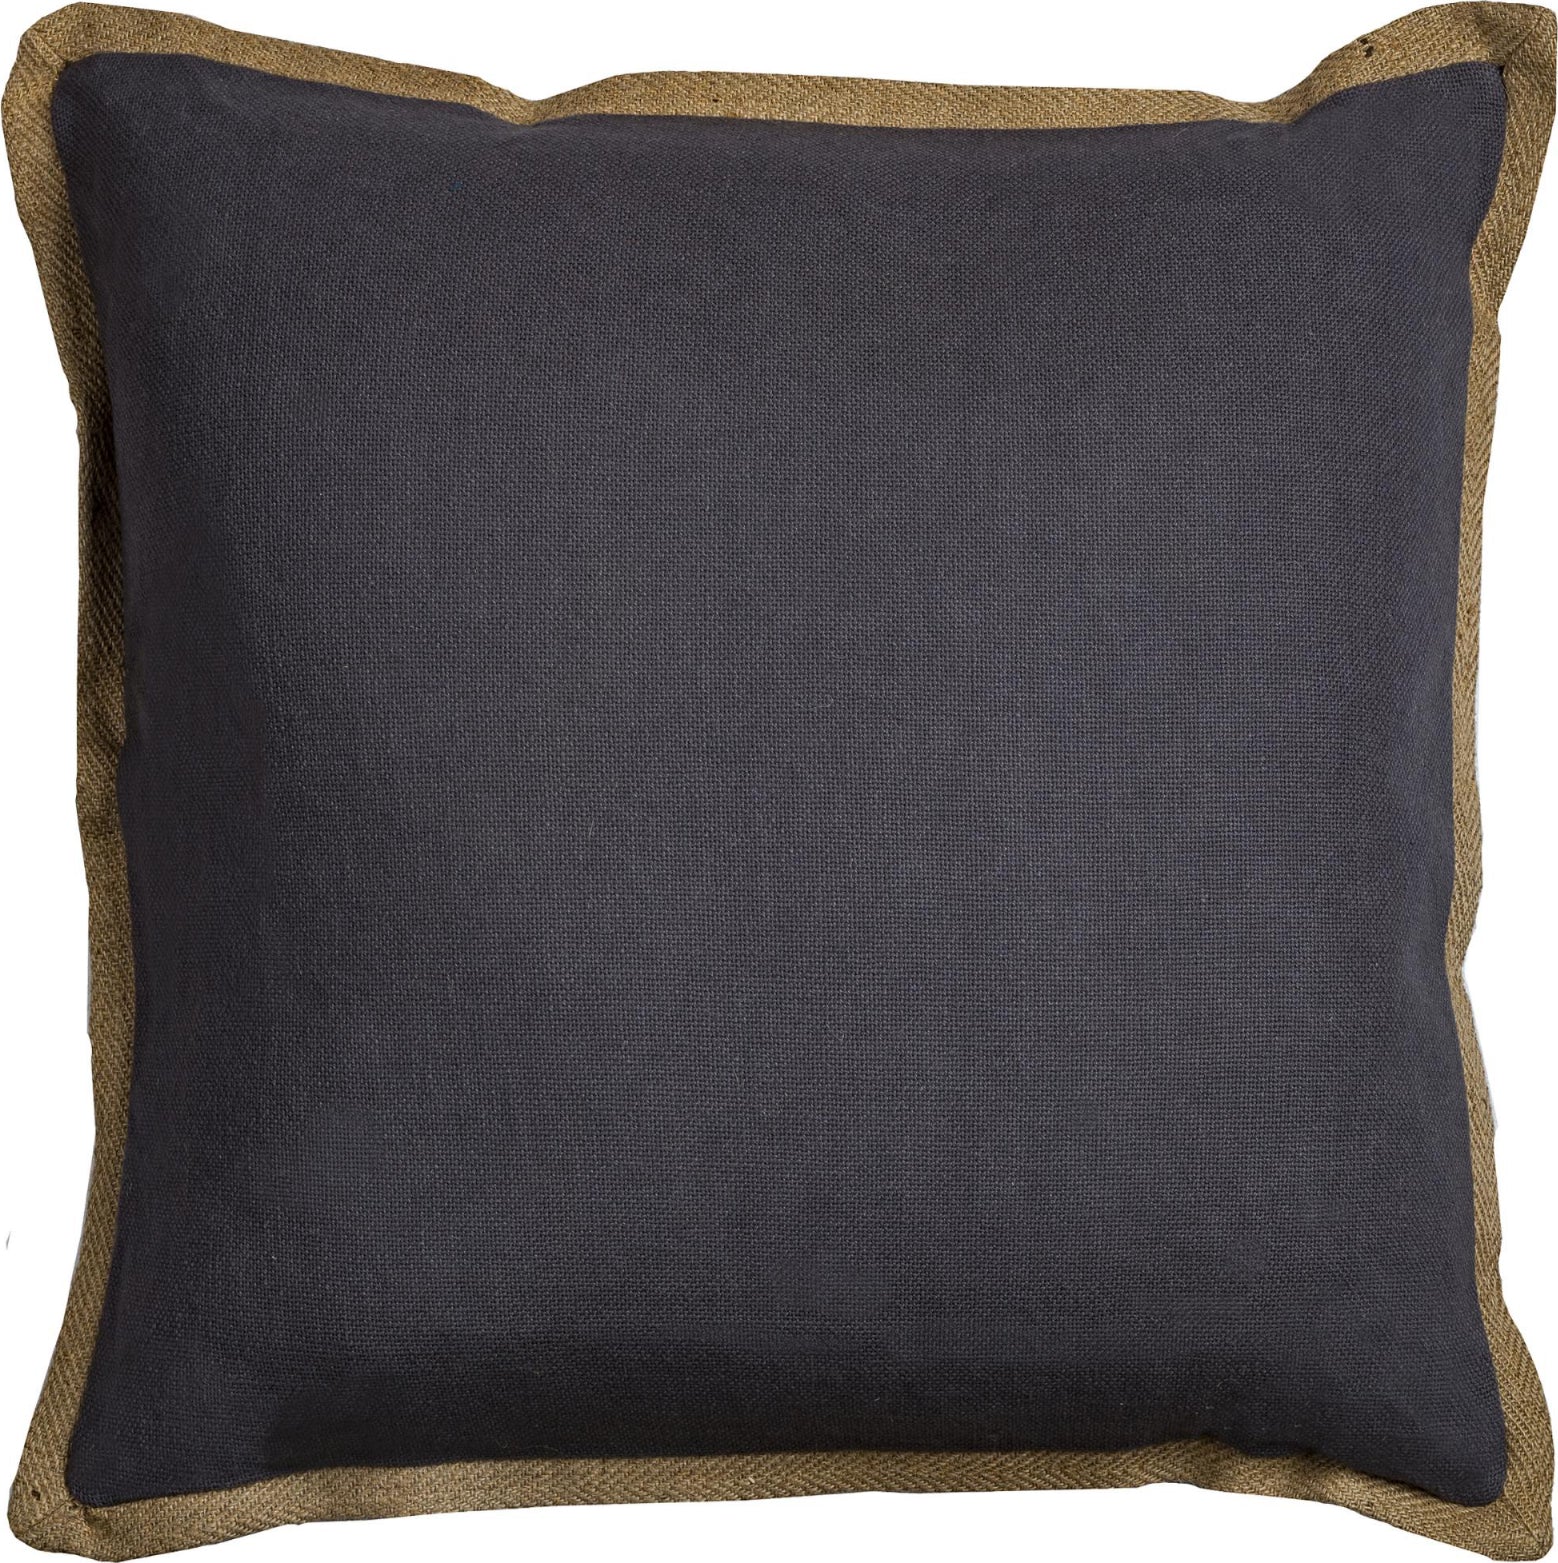 Rizzy Pillows T10508 Charcoal Gray